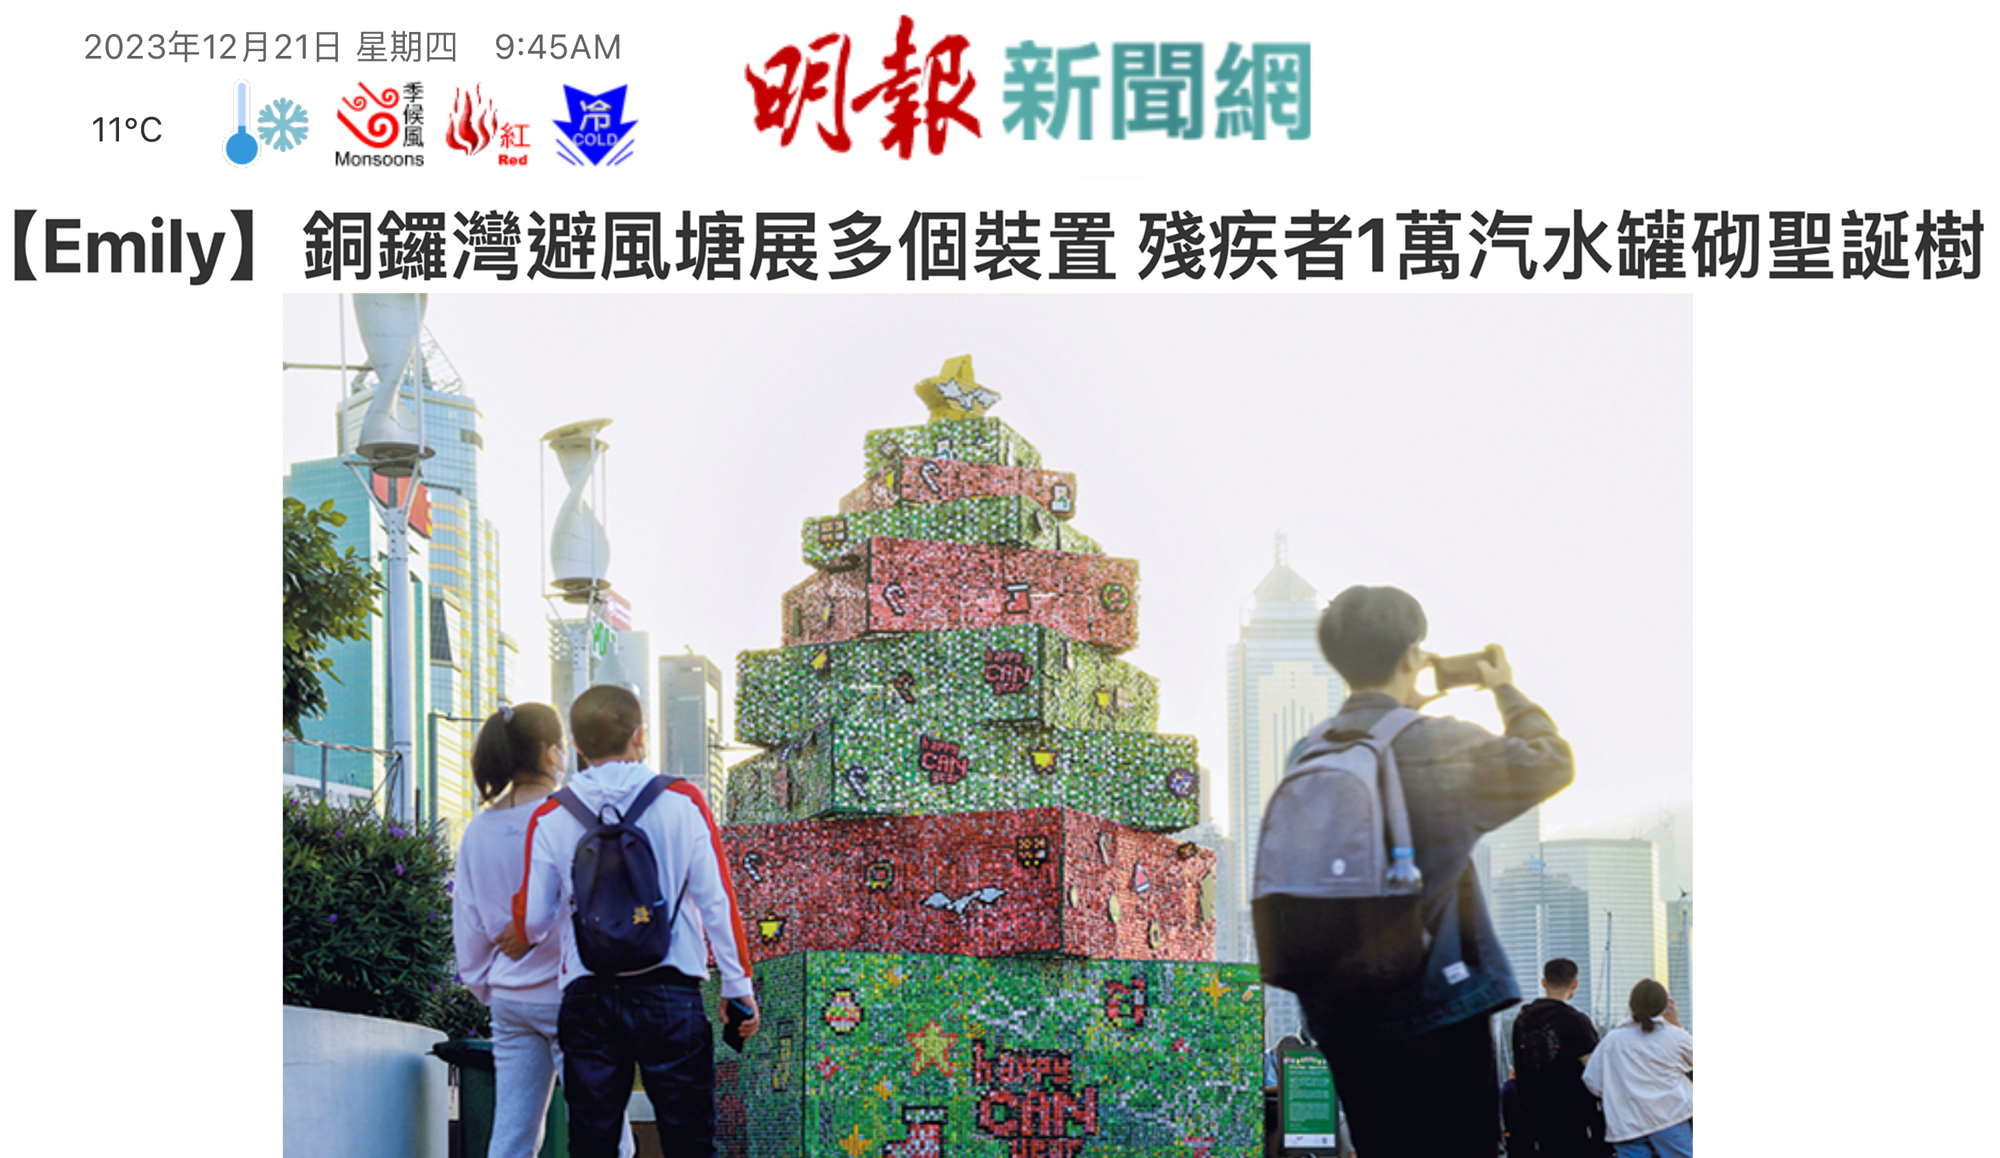 Cover Image - MingPao - Happy Can Year - Christmas Installation by Alchemist Creations x Opportunities and Inclusion for People with Disabilities